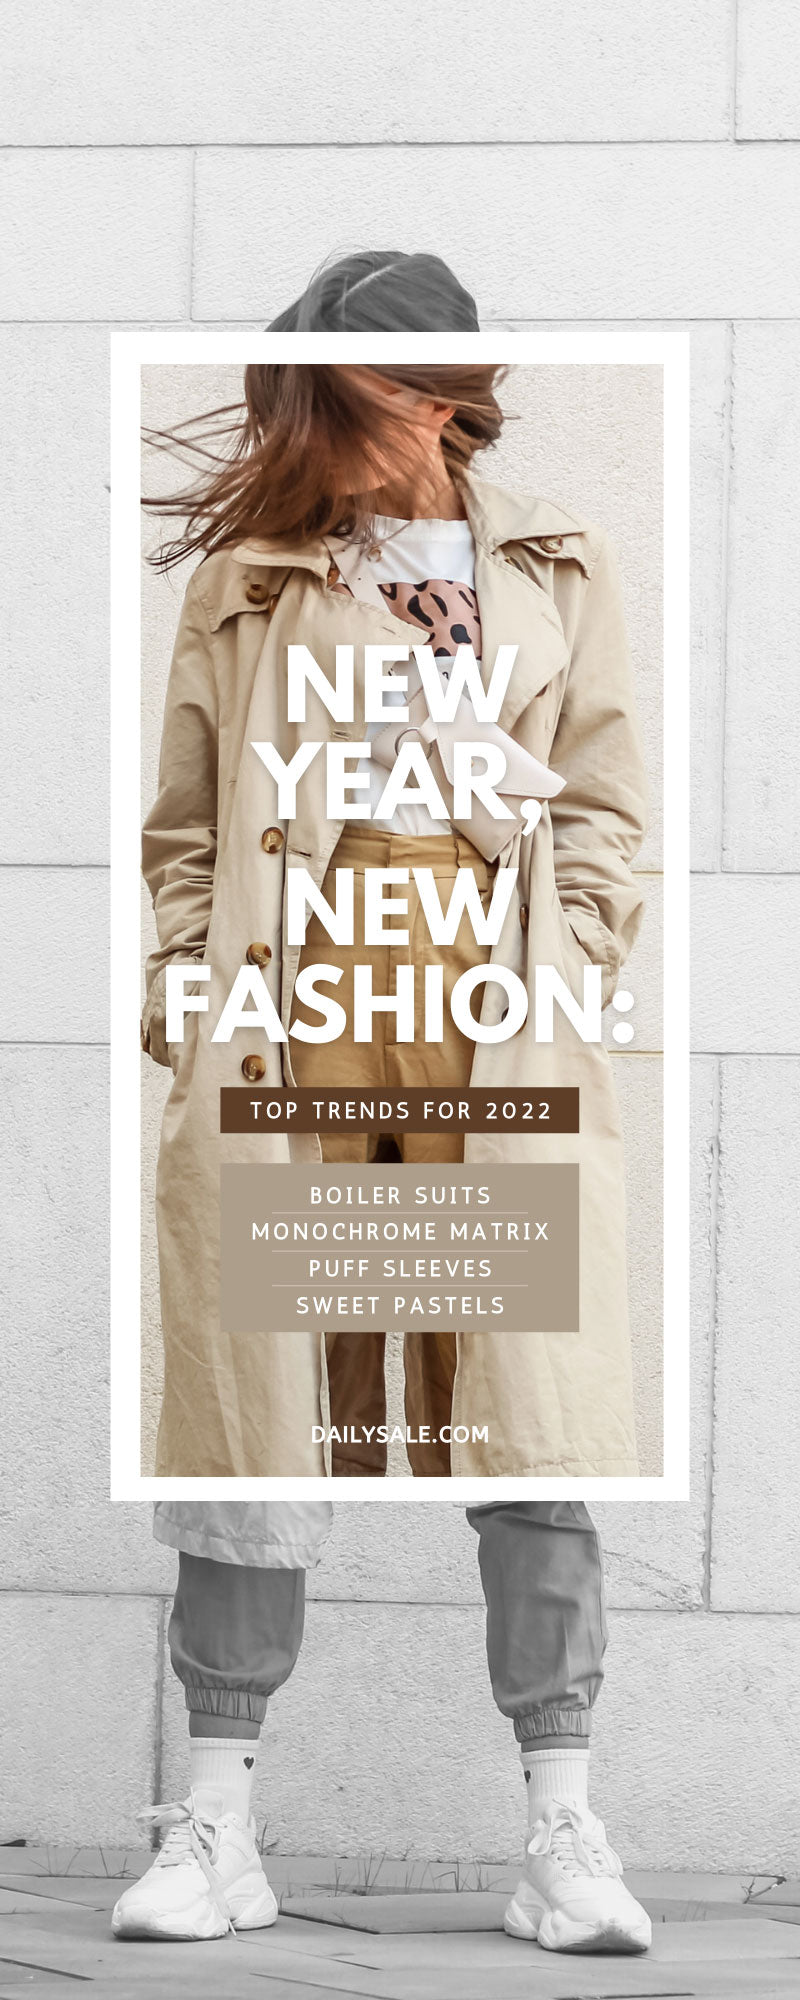 New Year, New Fashion: Top Trends for 2022